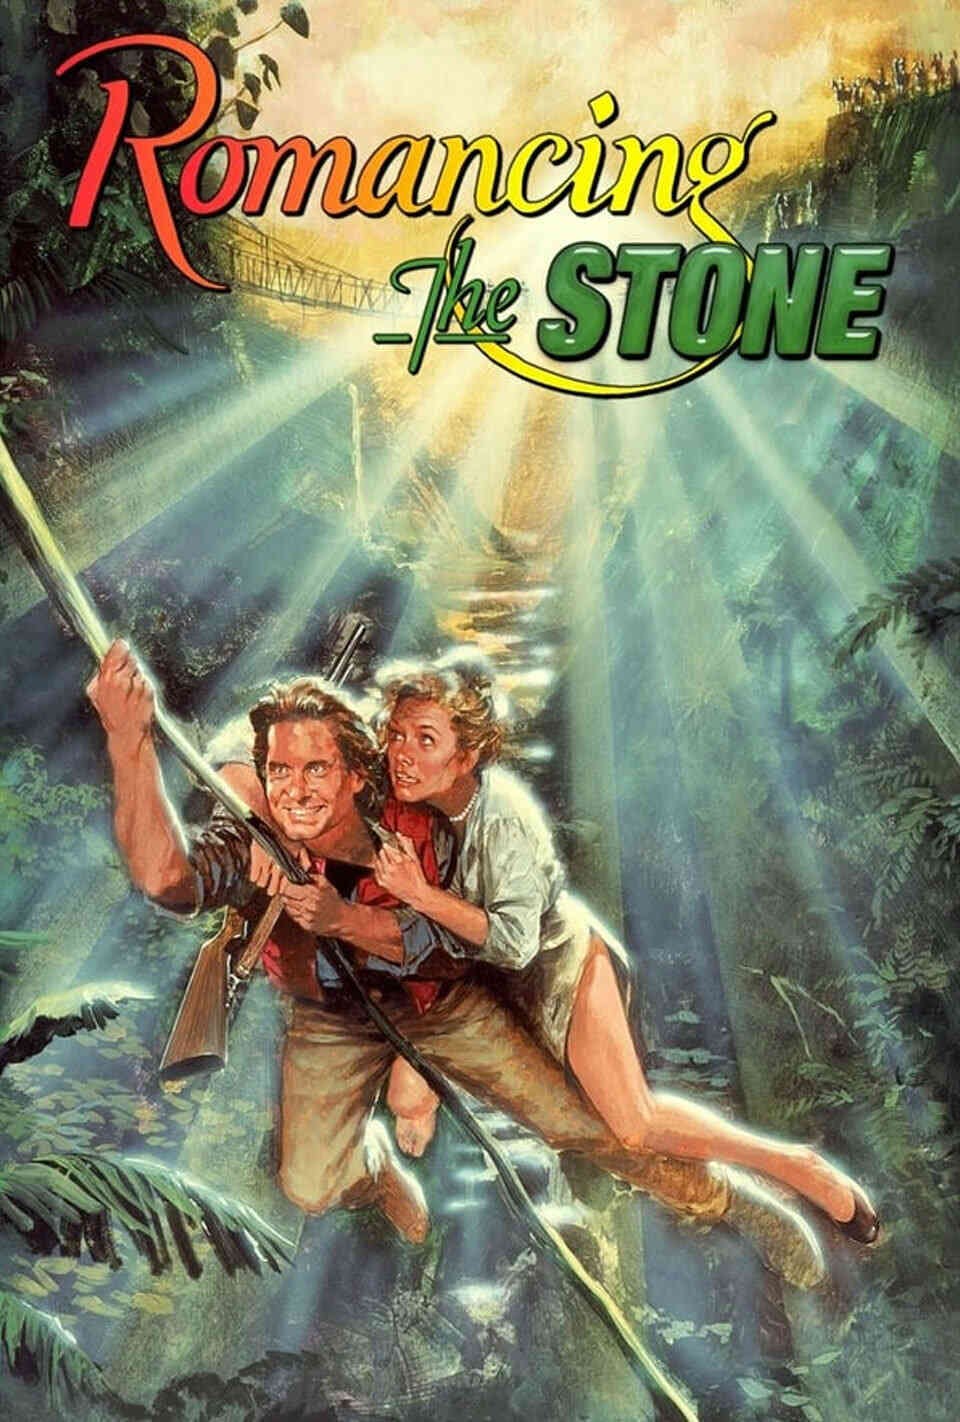 Read Romancing the Stone screenplay (poster)